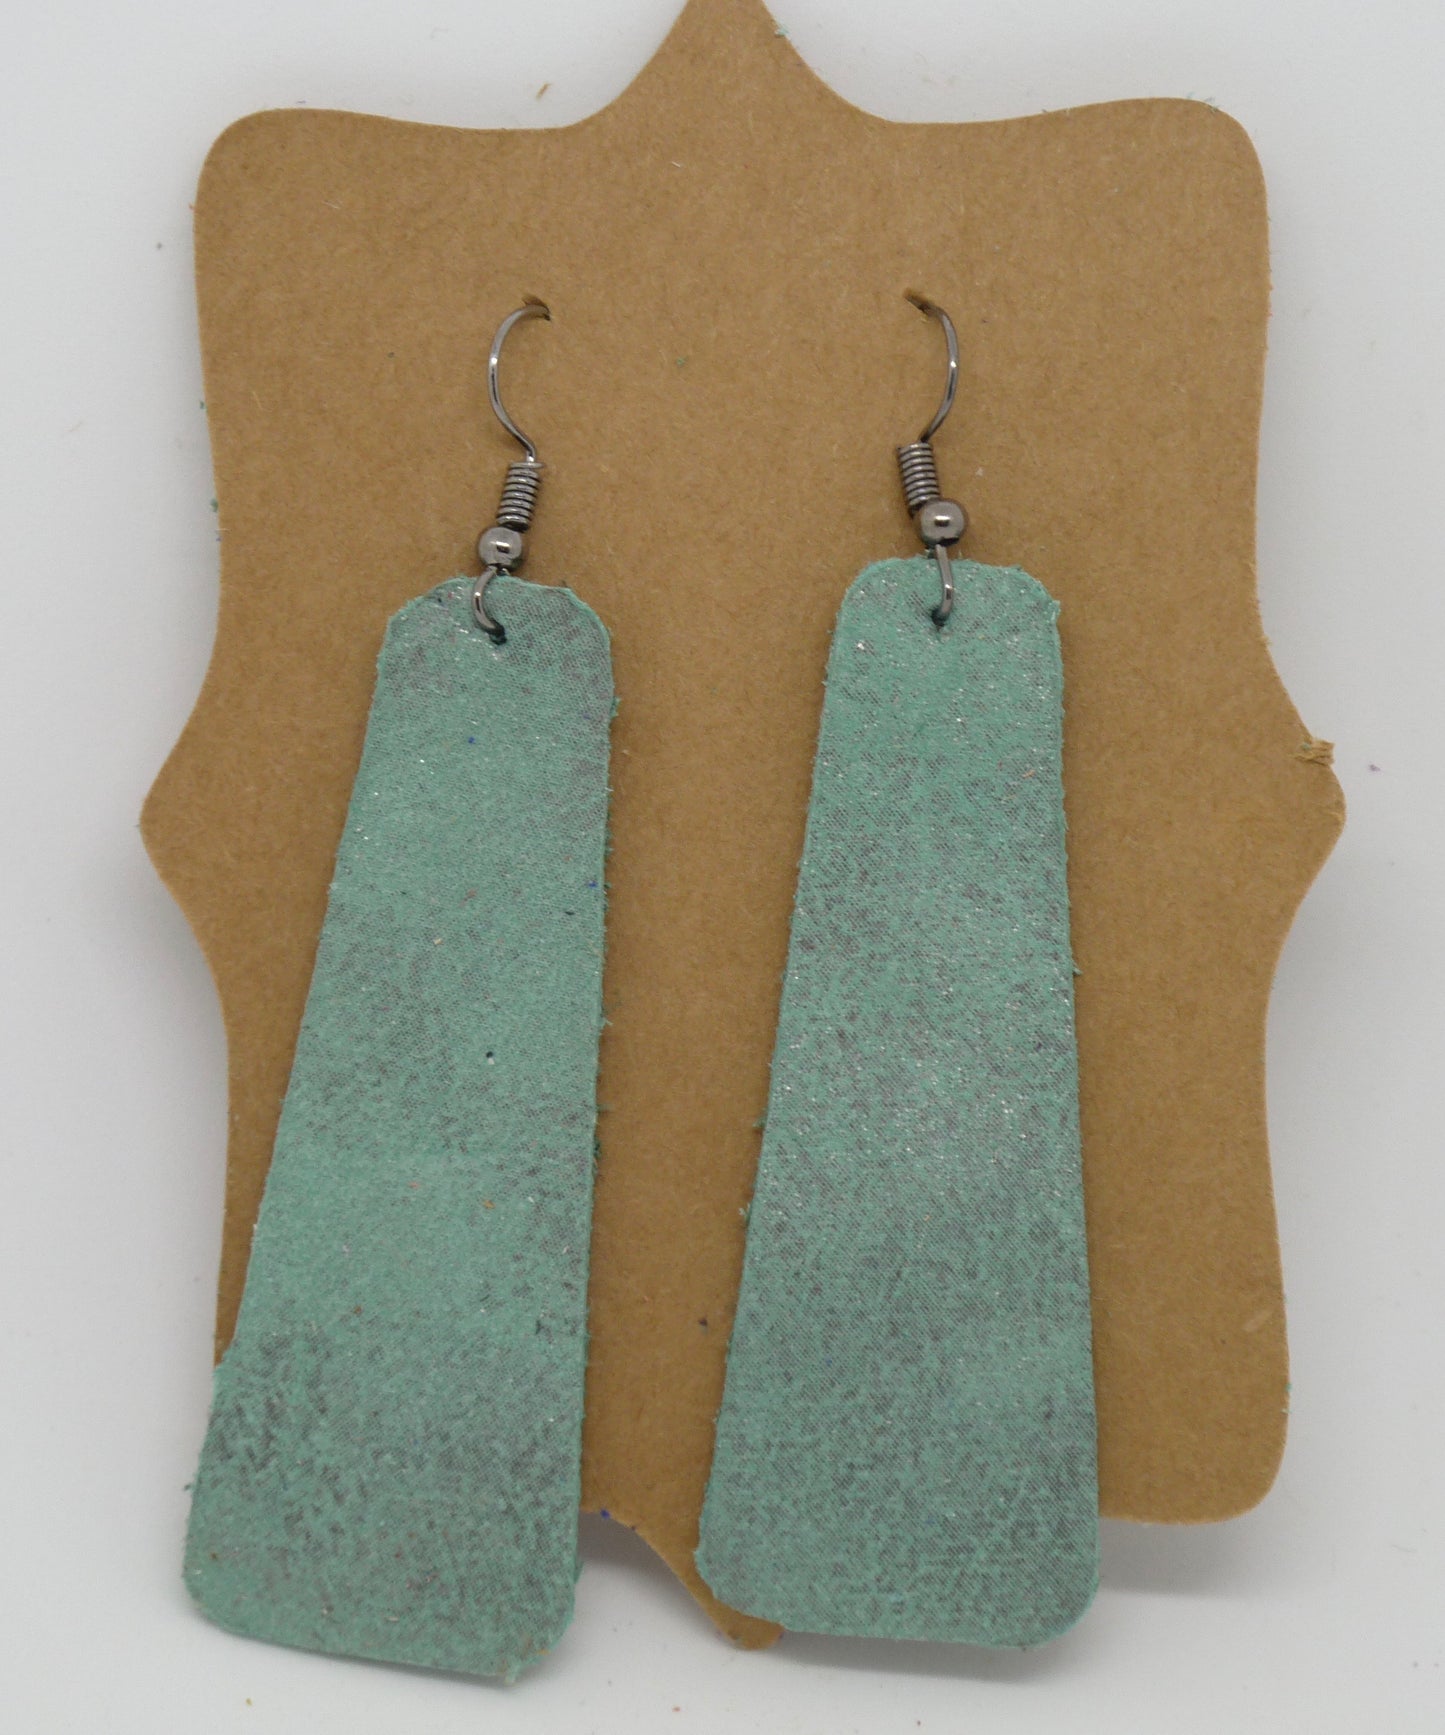 Rounded Pyramid Bar Leather Earrings